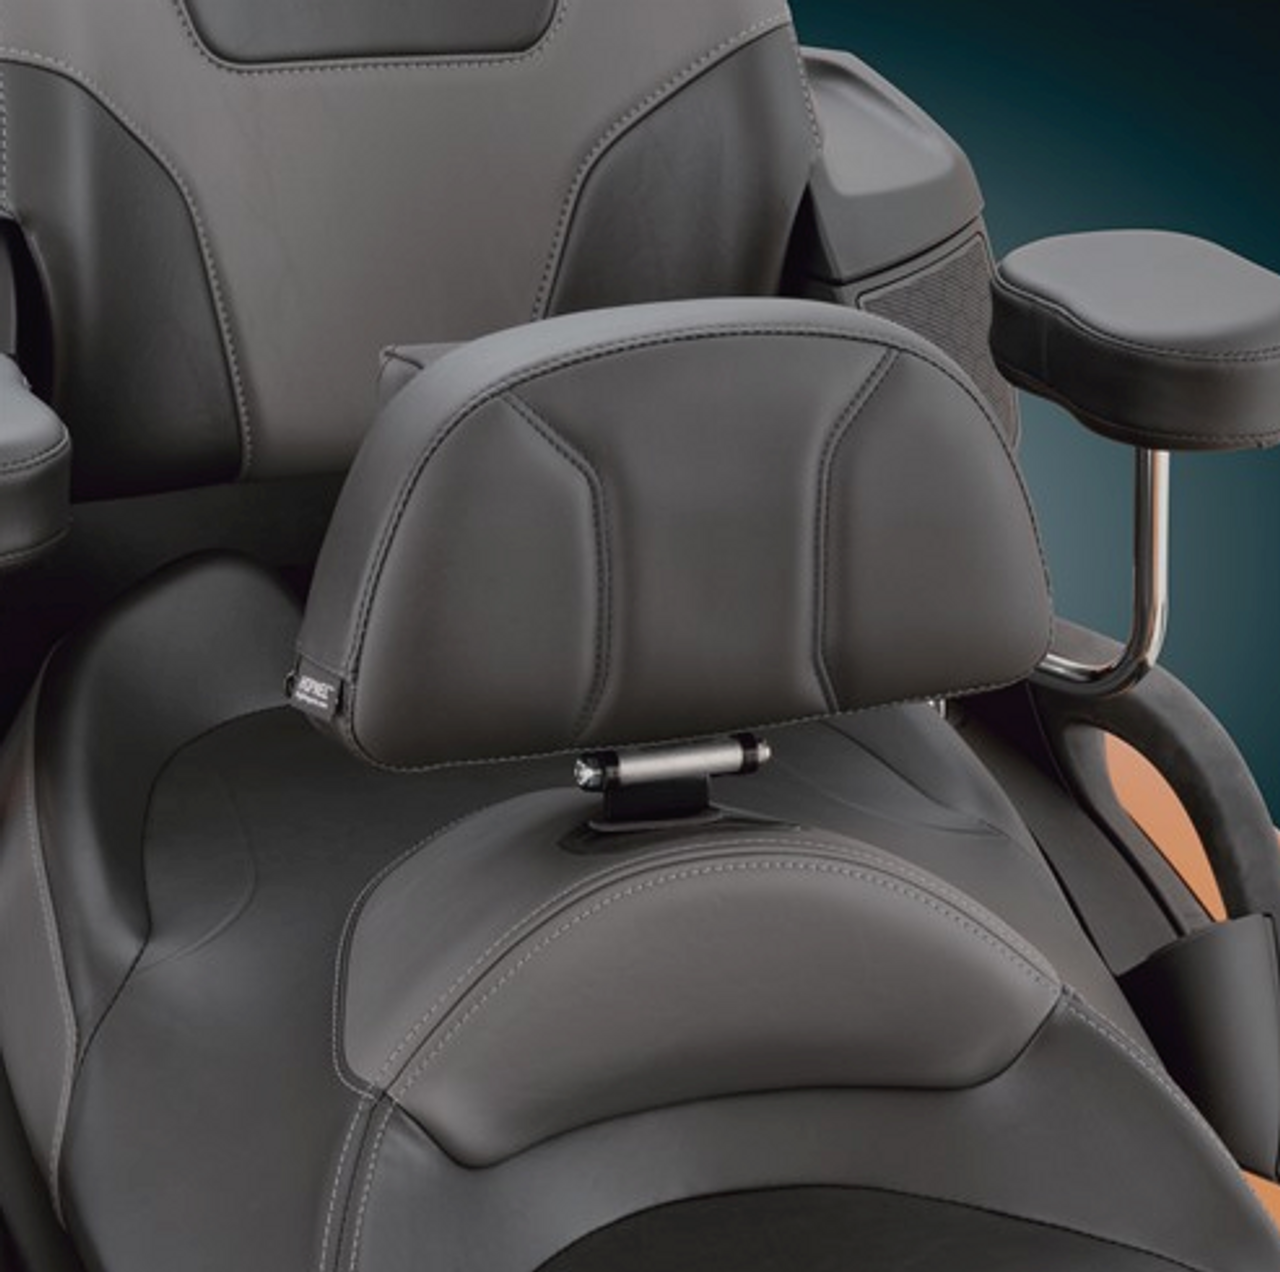 SEAT RISERS - DRIVERS SEAT - ADJUSTABLE FROM 3 3/8 TO 4 7/8